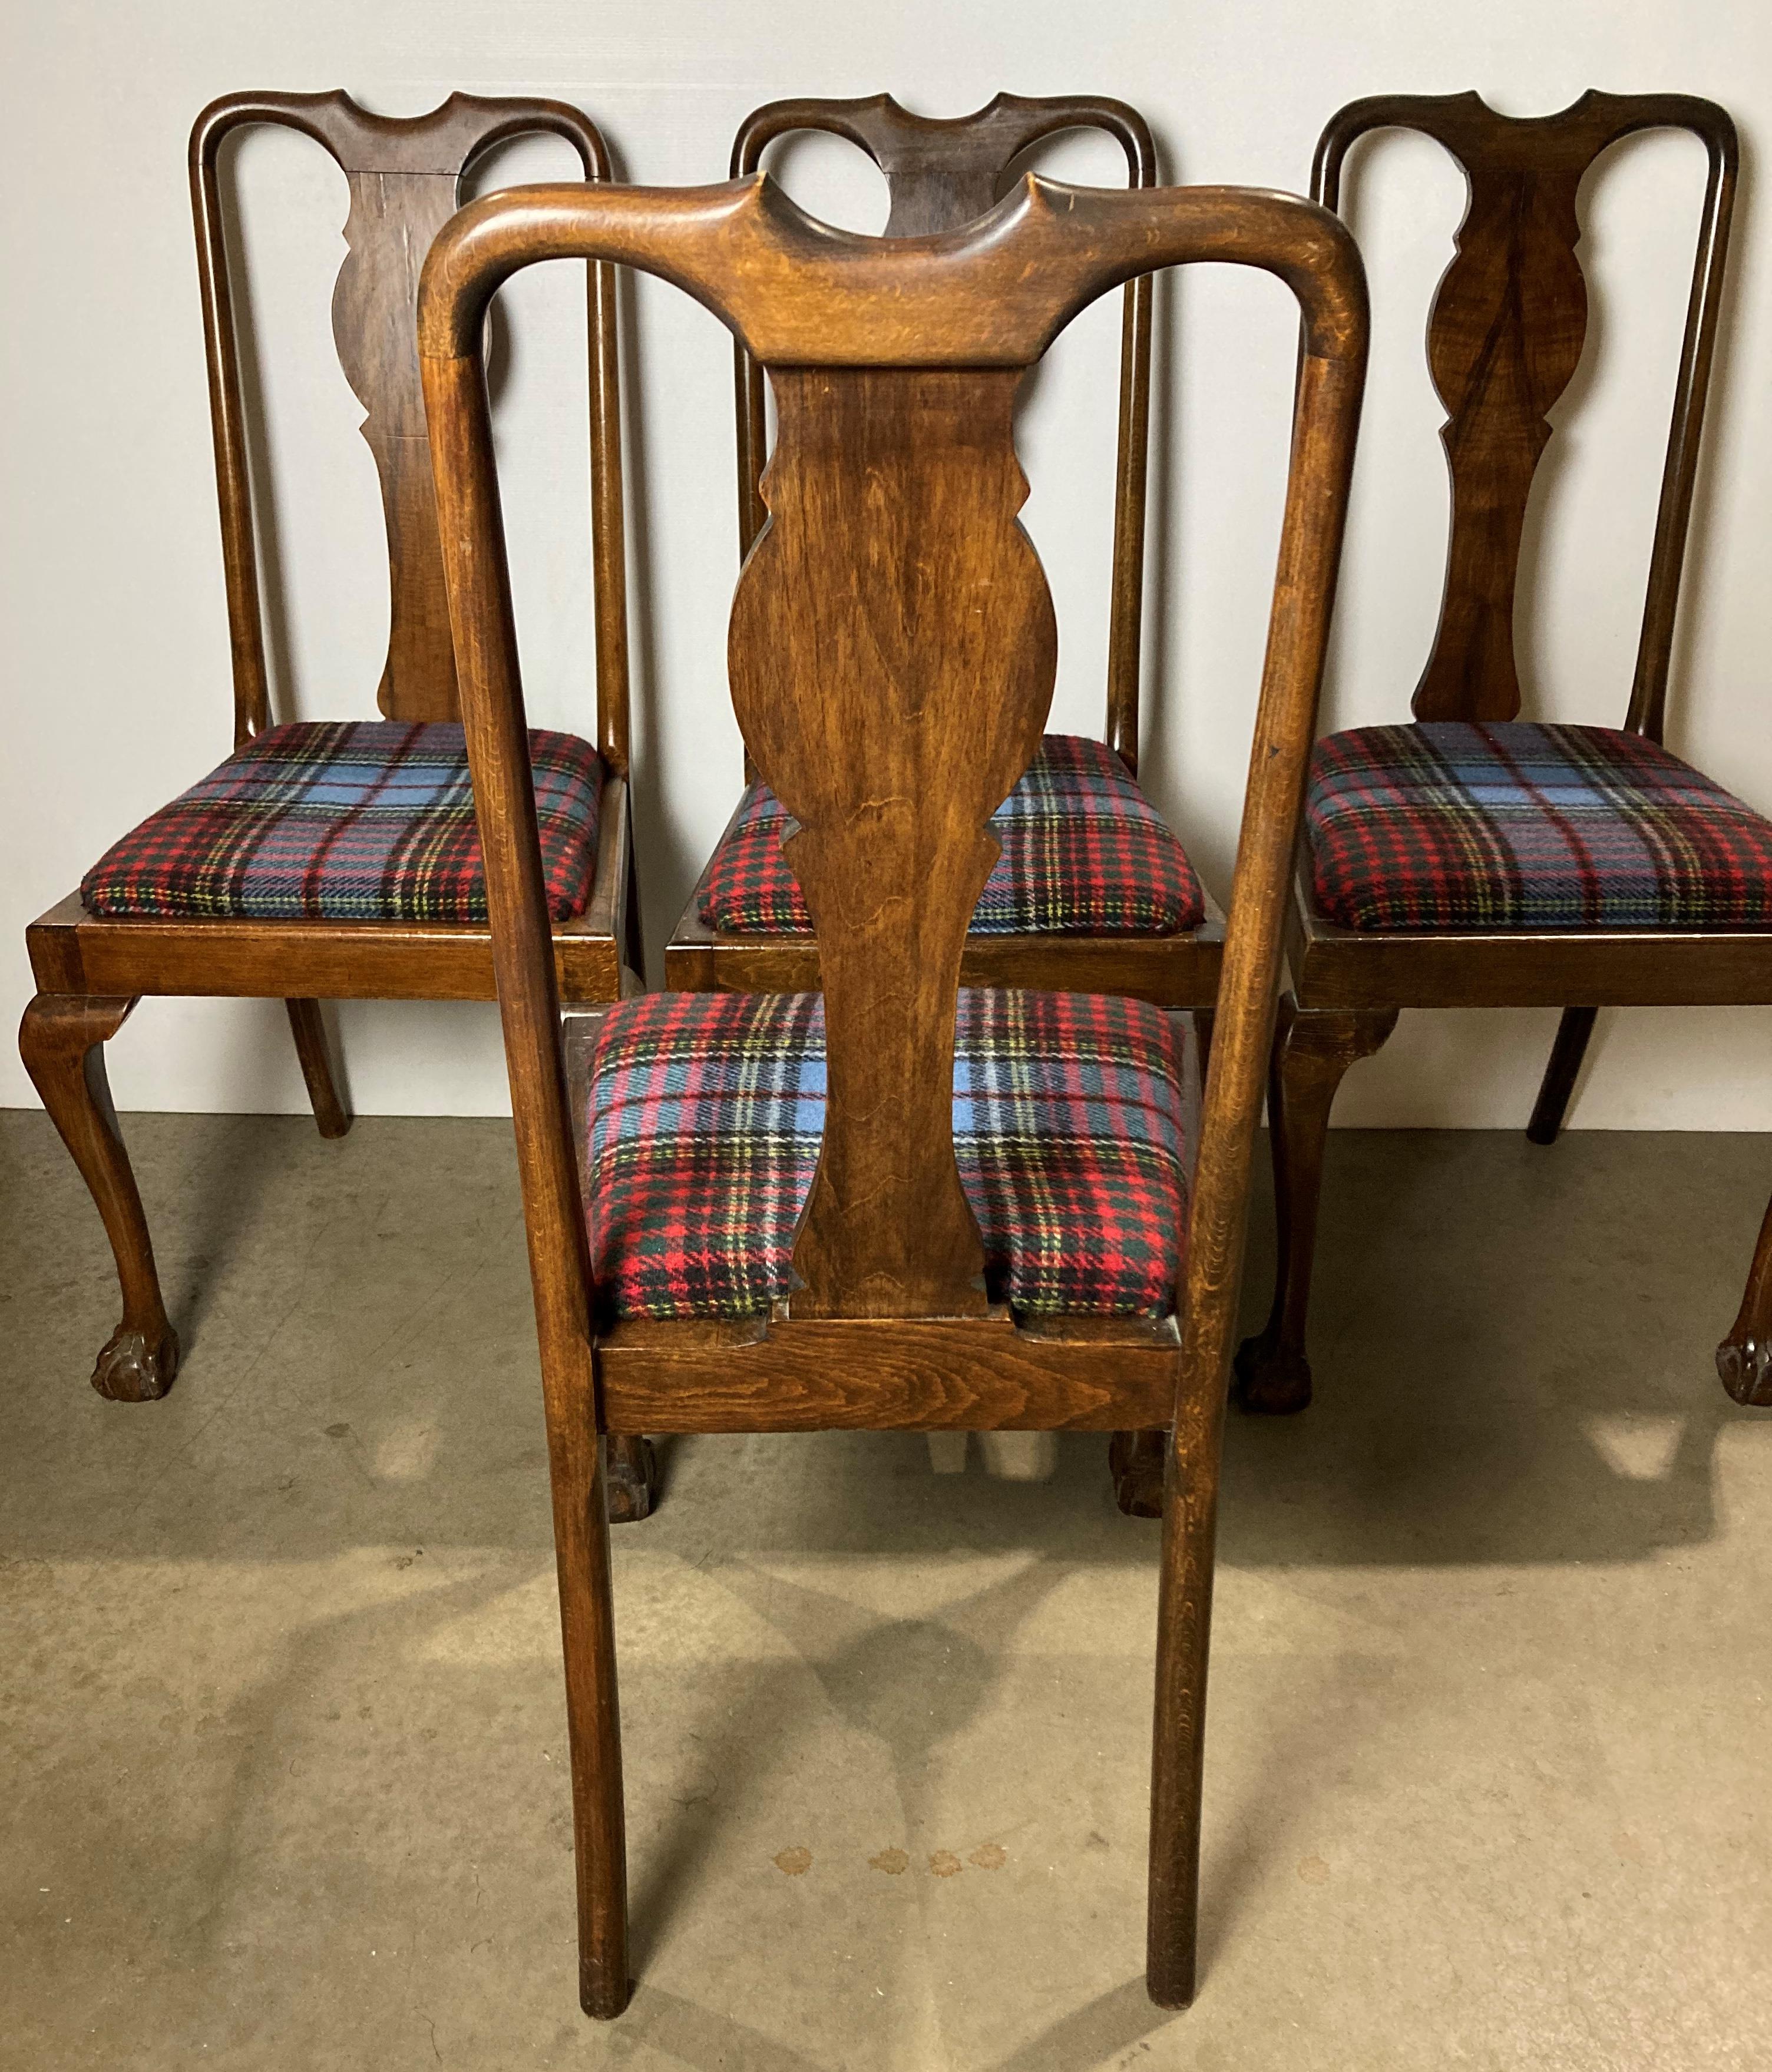 Set of four mahogany dining chairs on claw and ball feet with tartan-style fabric (re-upholstered) - Image 3 of 4